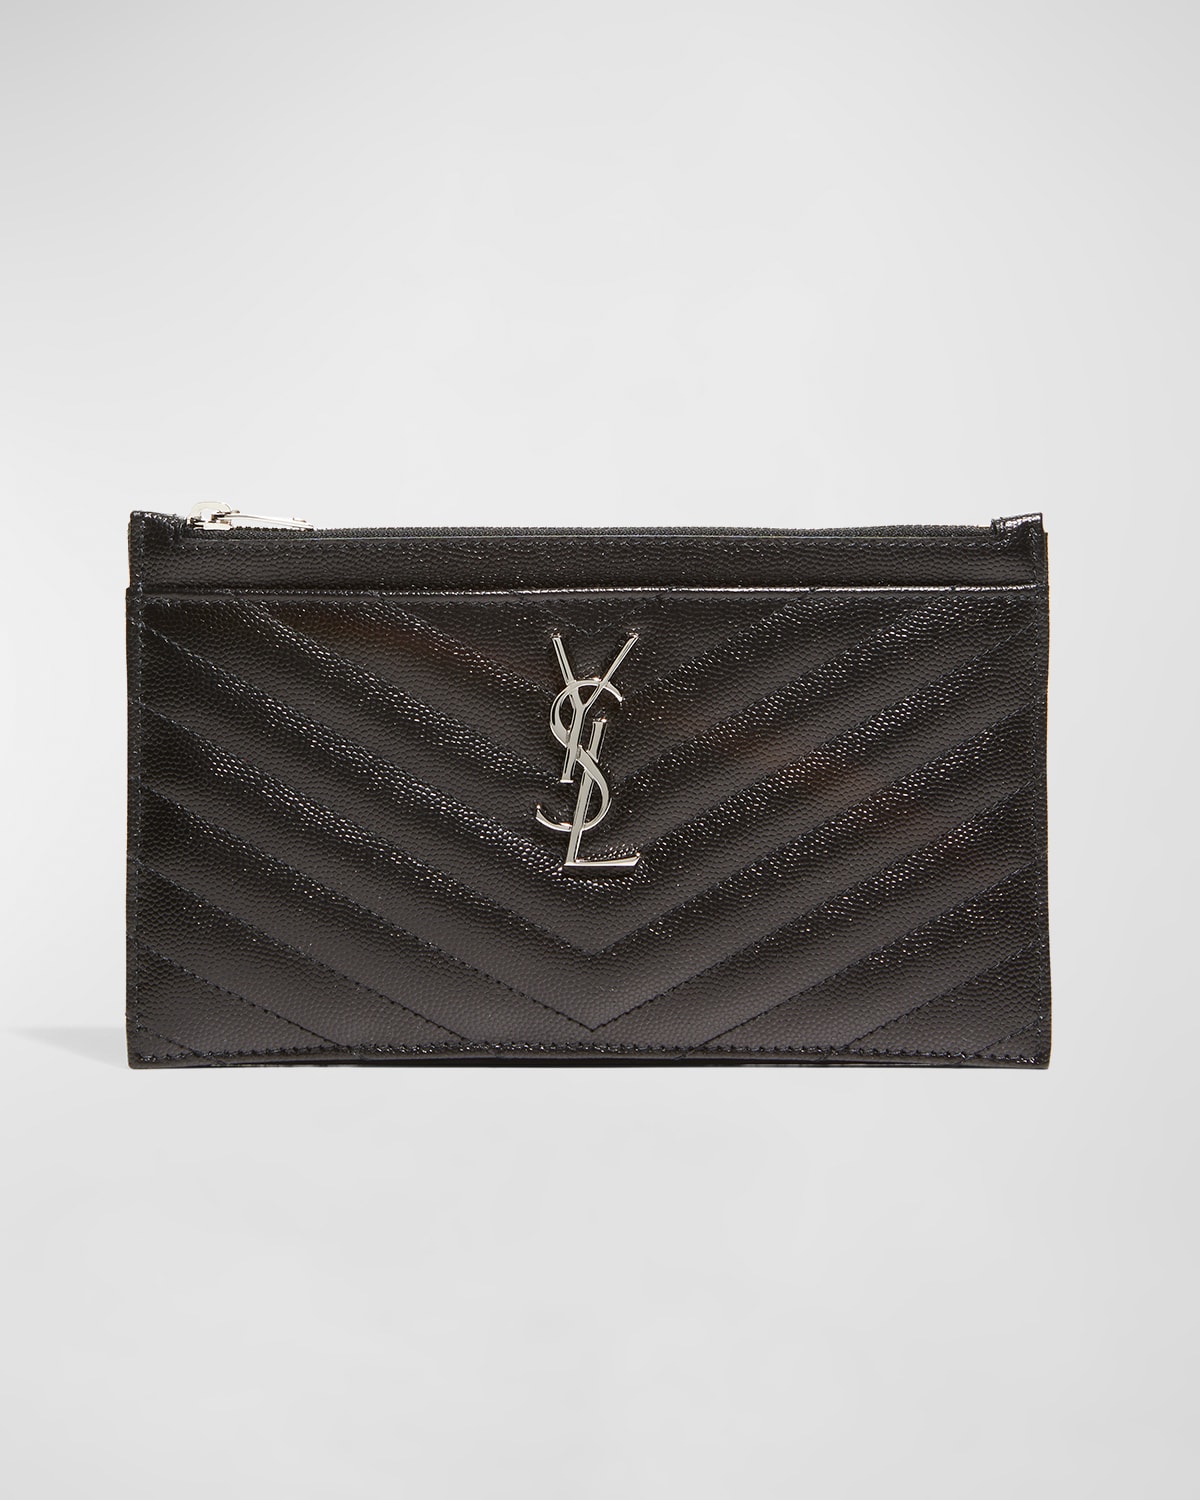 SAINT LAURENT YSL MONOGRAM SMALL ZIPTOP BILL POUCH IN GRAINED LEATHER,PROD237700477